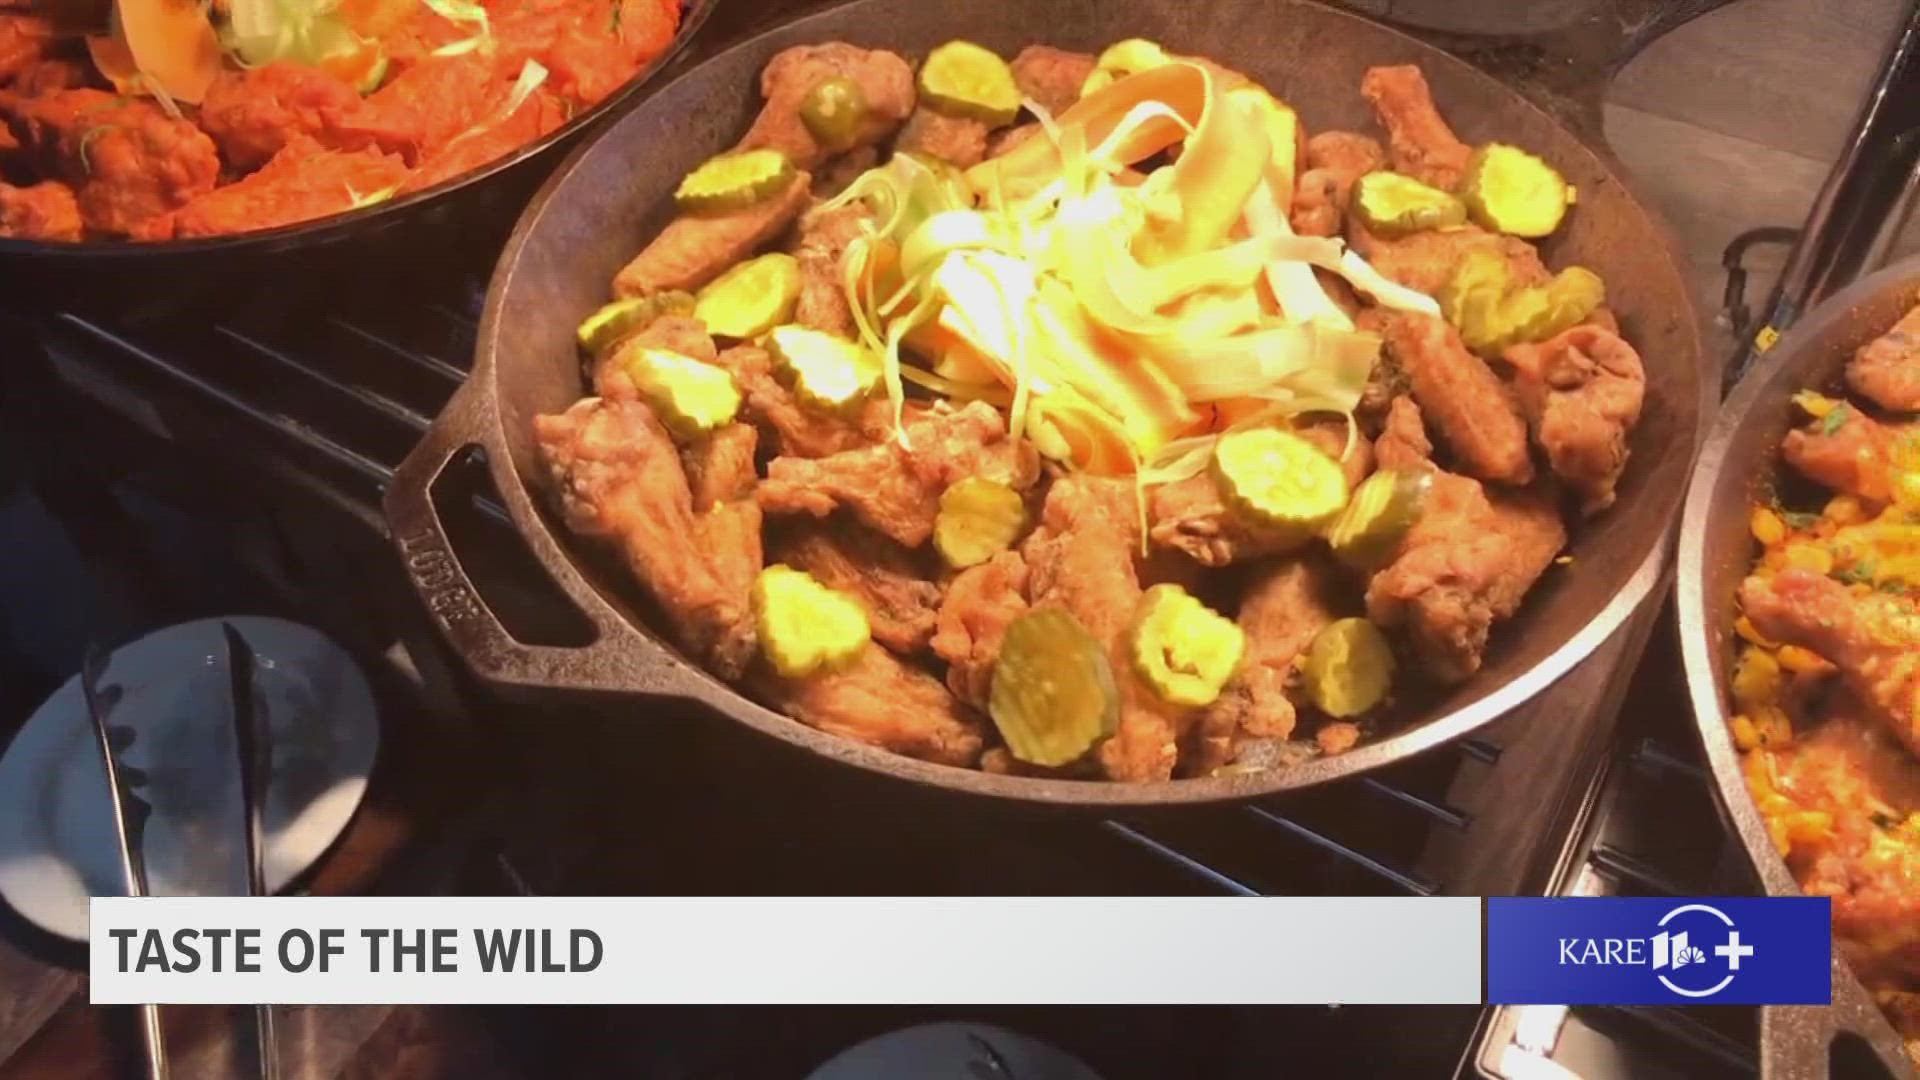 Wild Executive Chef Kyle Bowles is as excited for the home opener as the players are. He will debut a menu with new features and old favorites to please every fan.